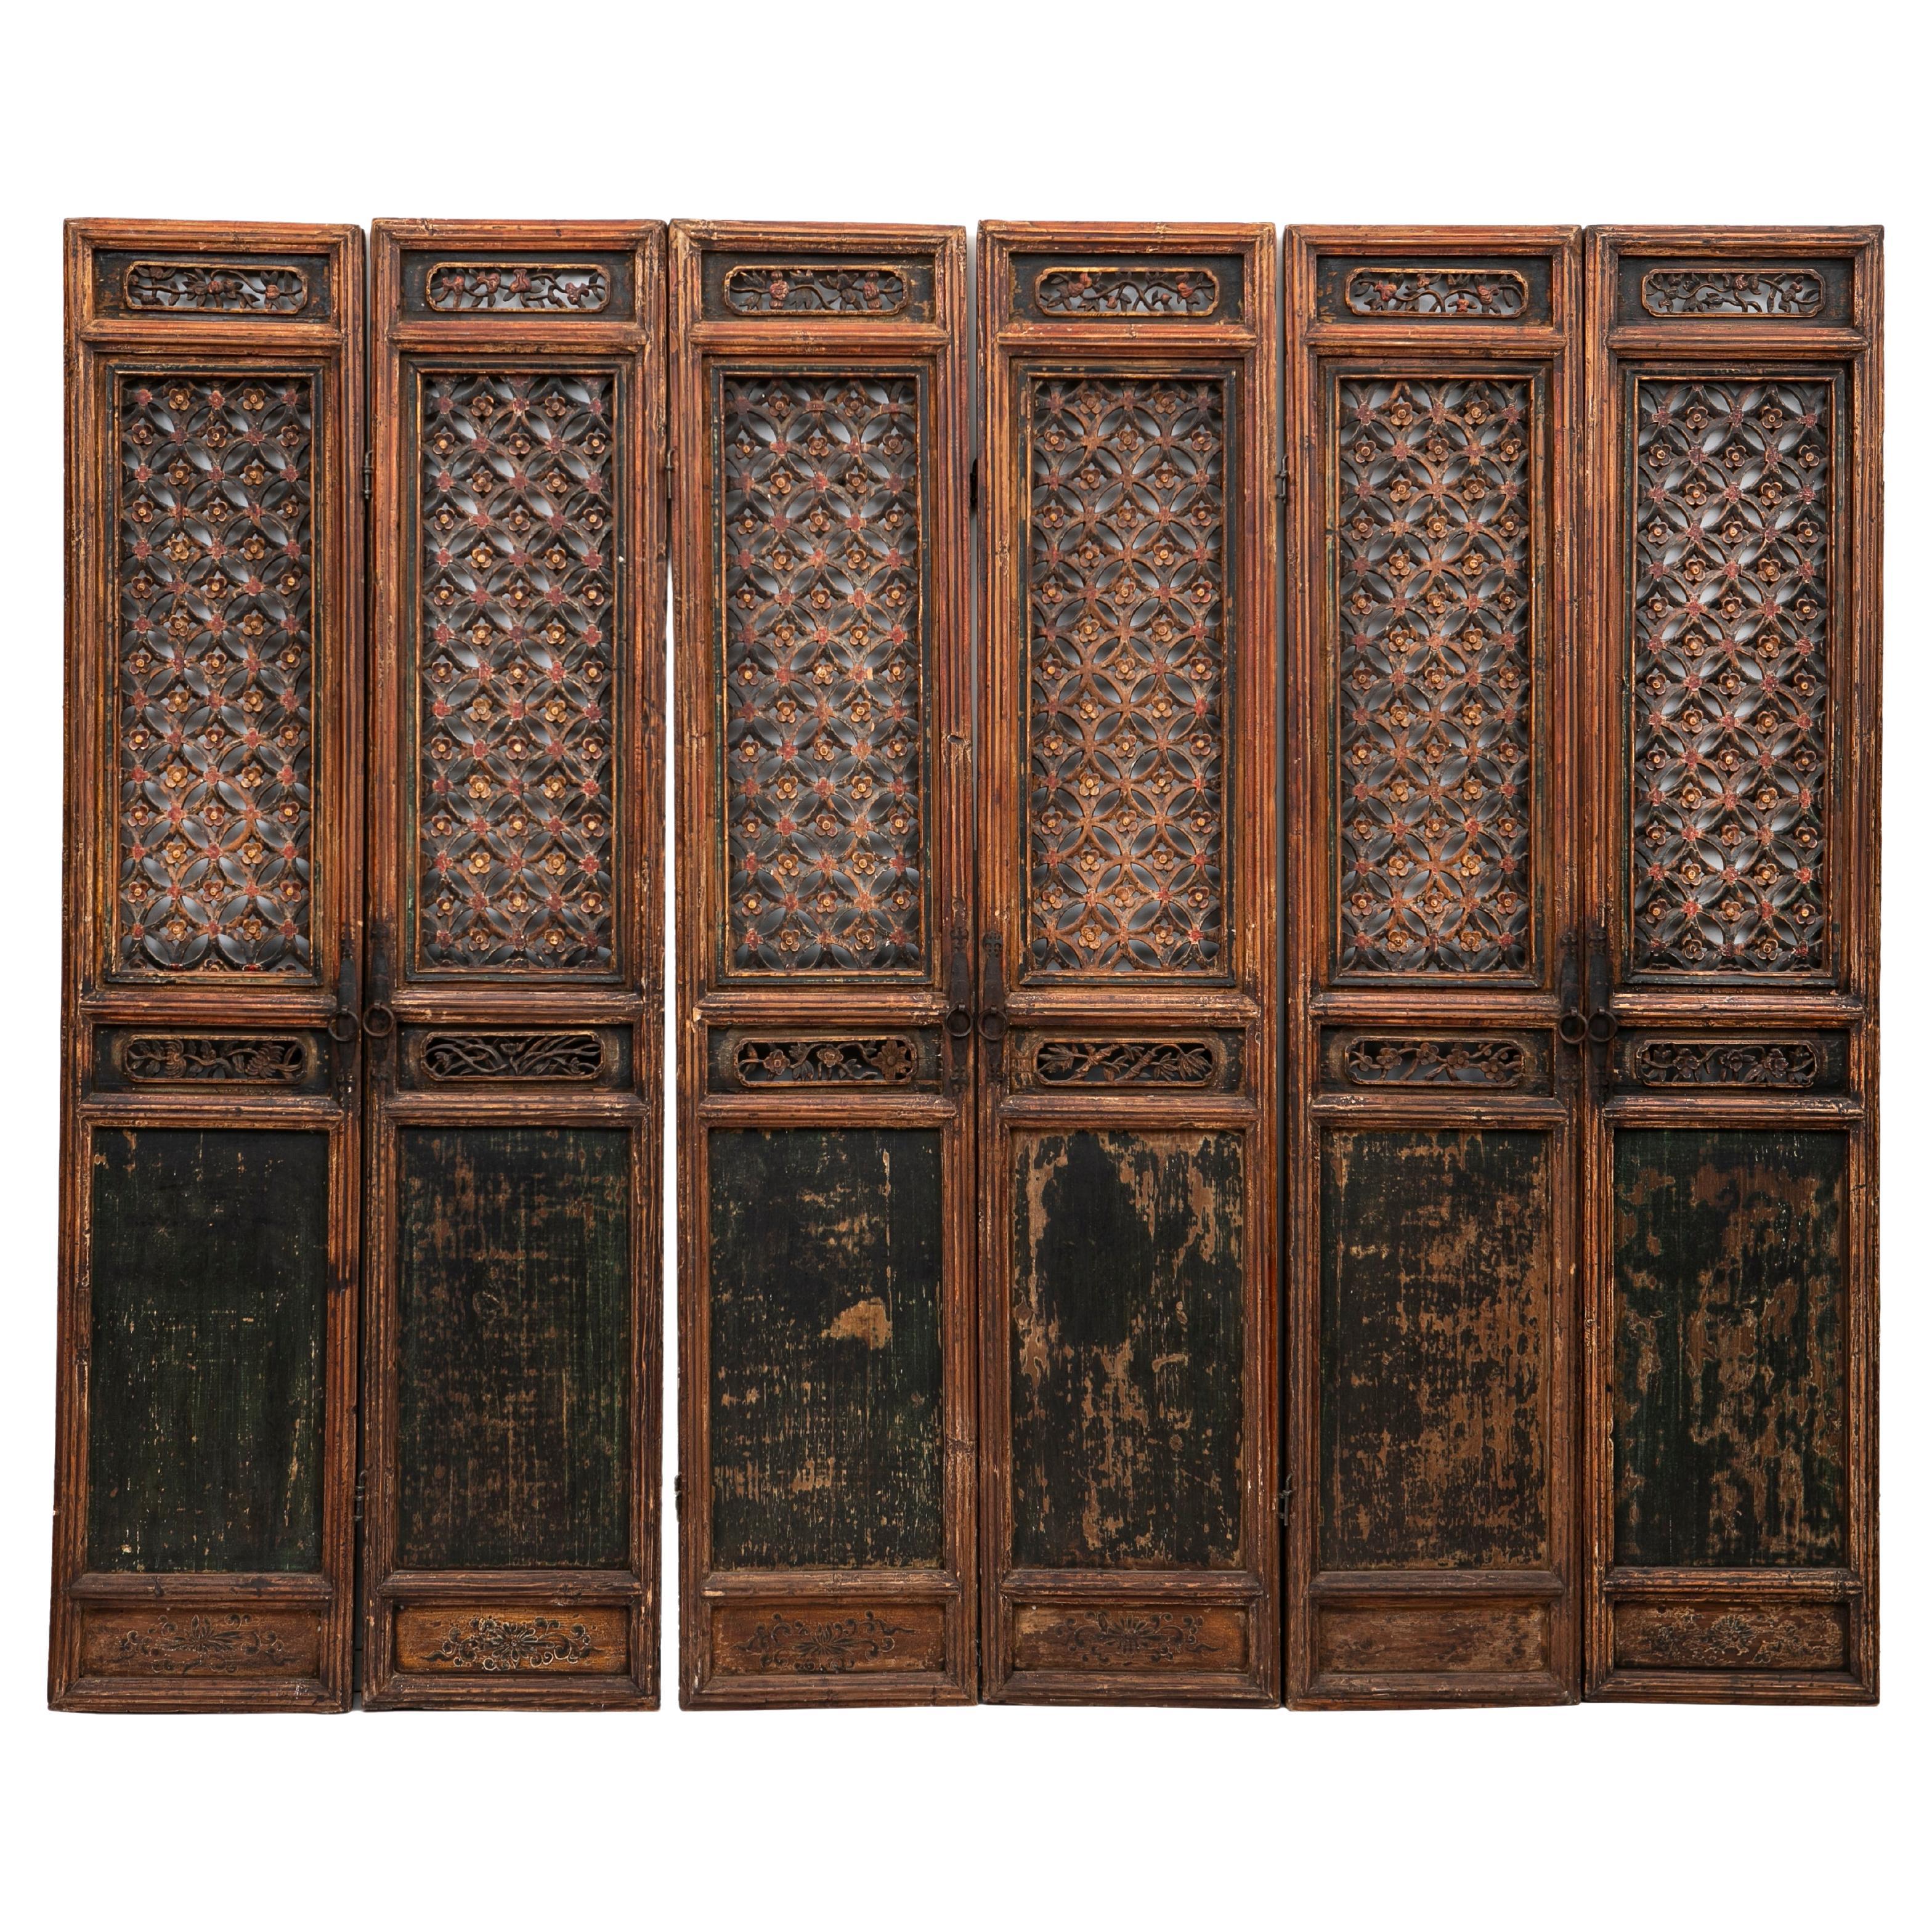 Set of 6 Antique Chinese Lattice Panels For Sale